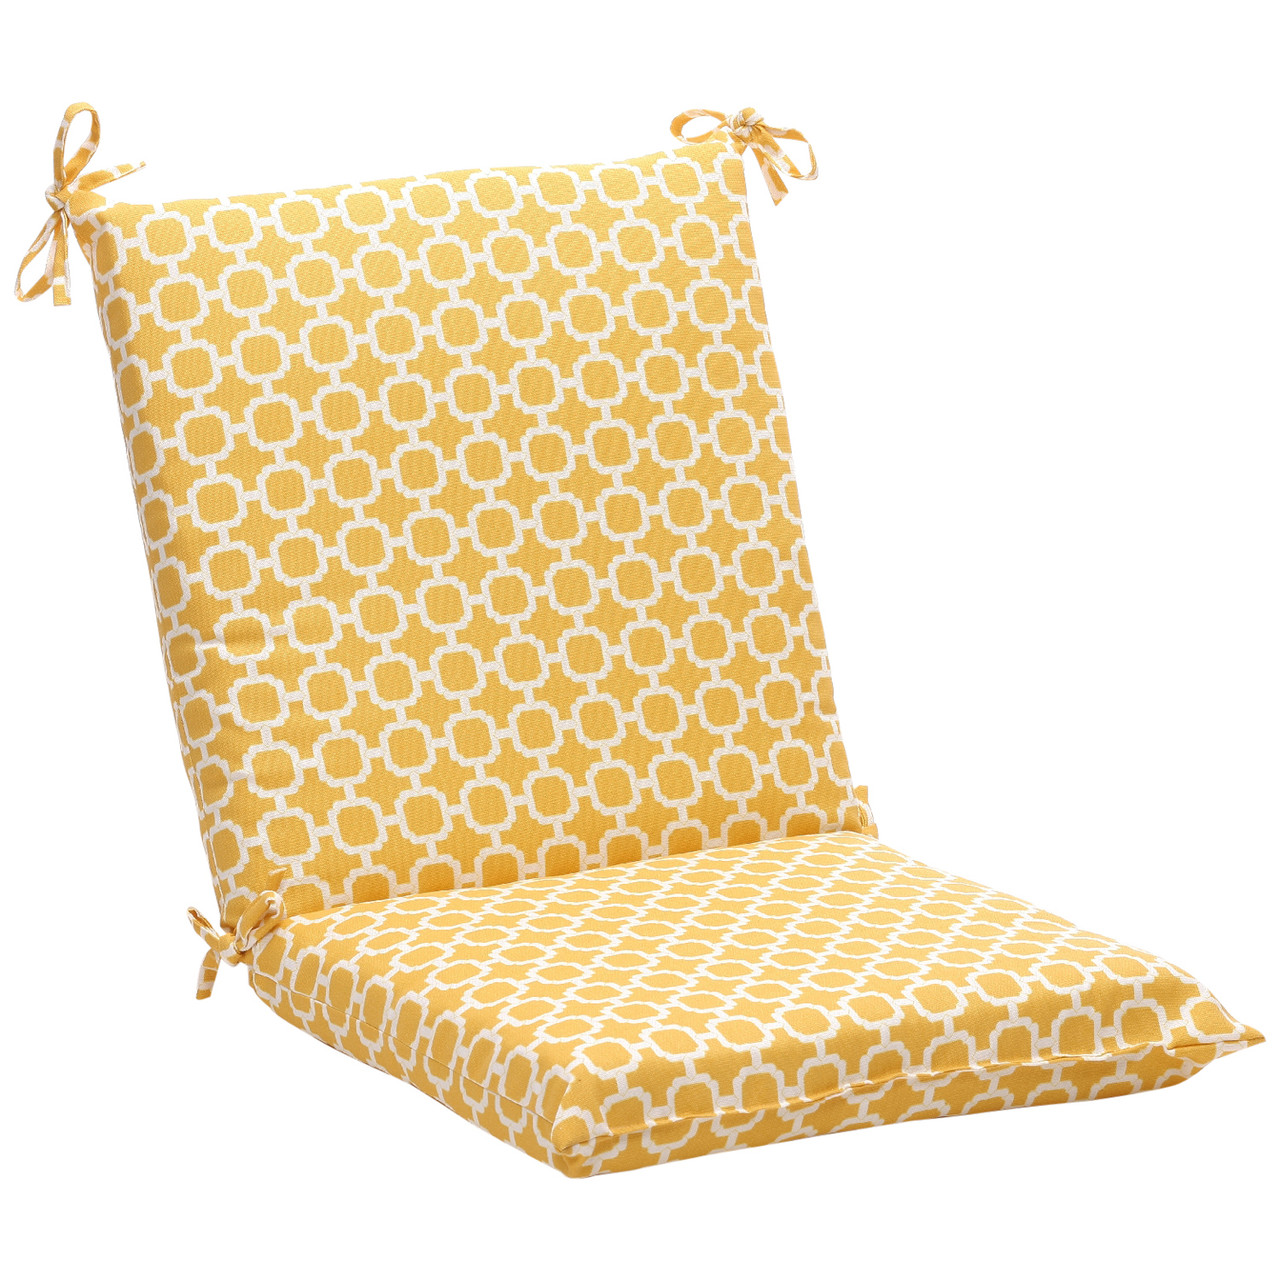 Geometric Reversible Outdoor Patio Square Chair Cushion - 36.5 - Yellow  and White